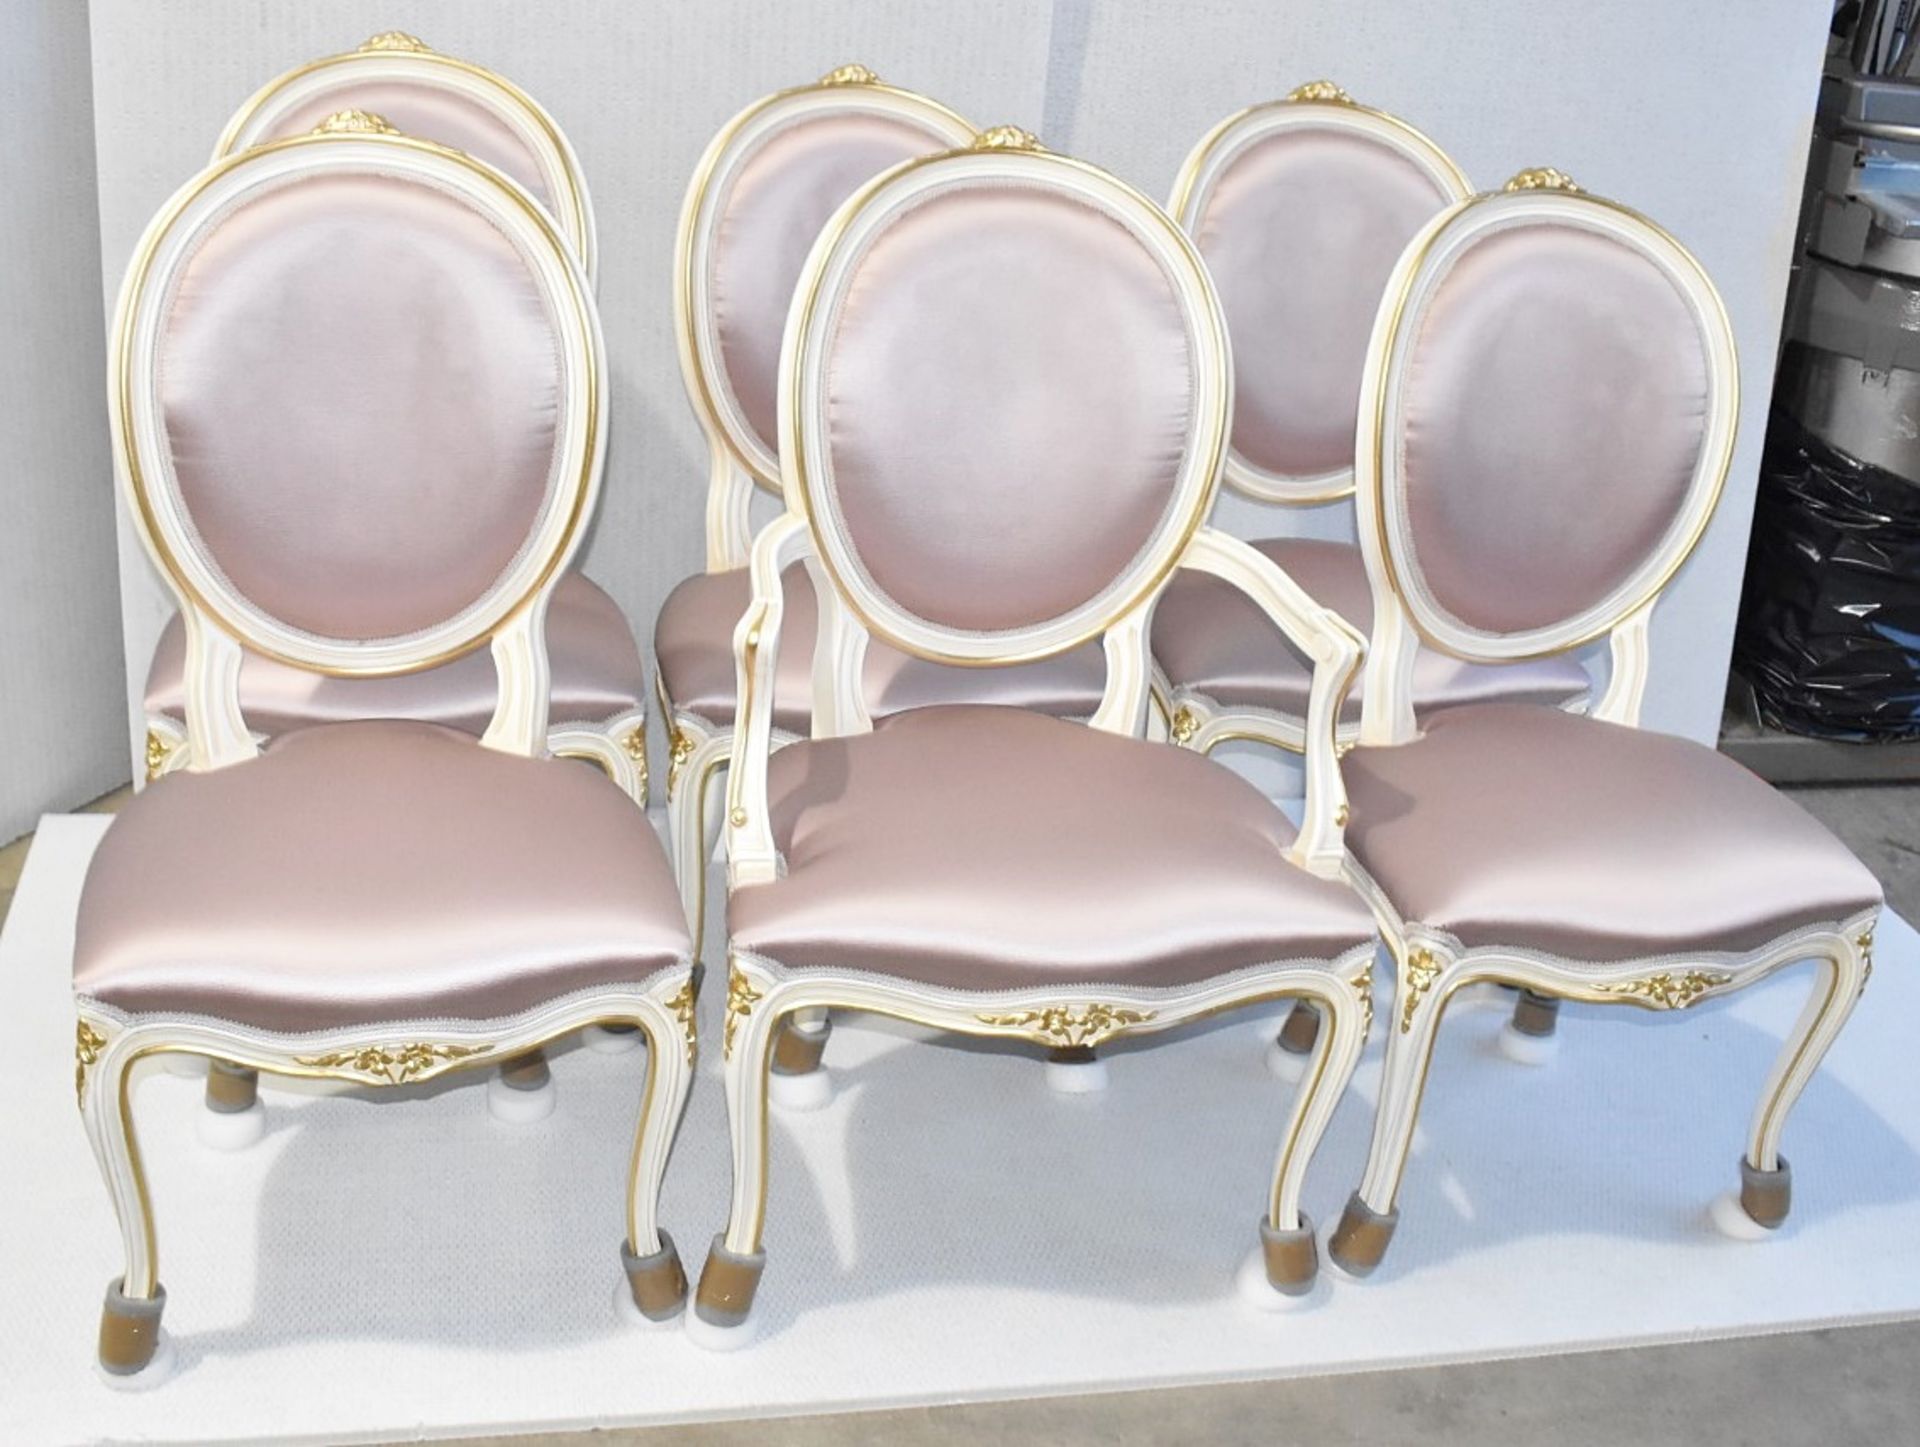 Set of 6 x ANGELO CAPPELLINI 'Timeless' Baroque-style Carved Dining Chairs, Upholstered in Pink Silk - Image 6 of 15